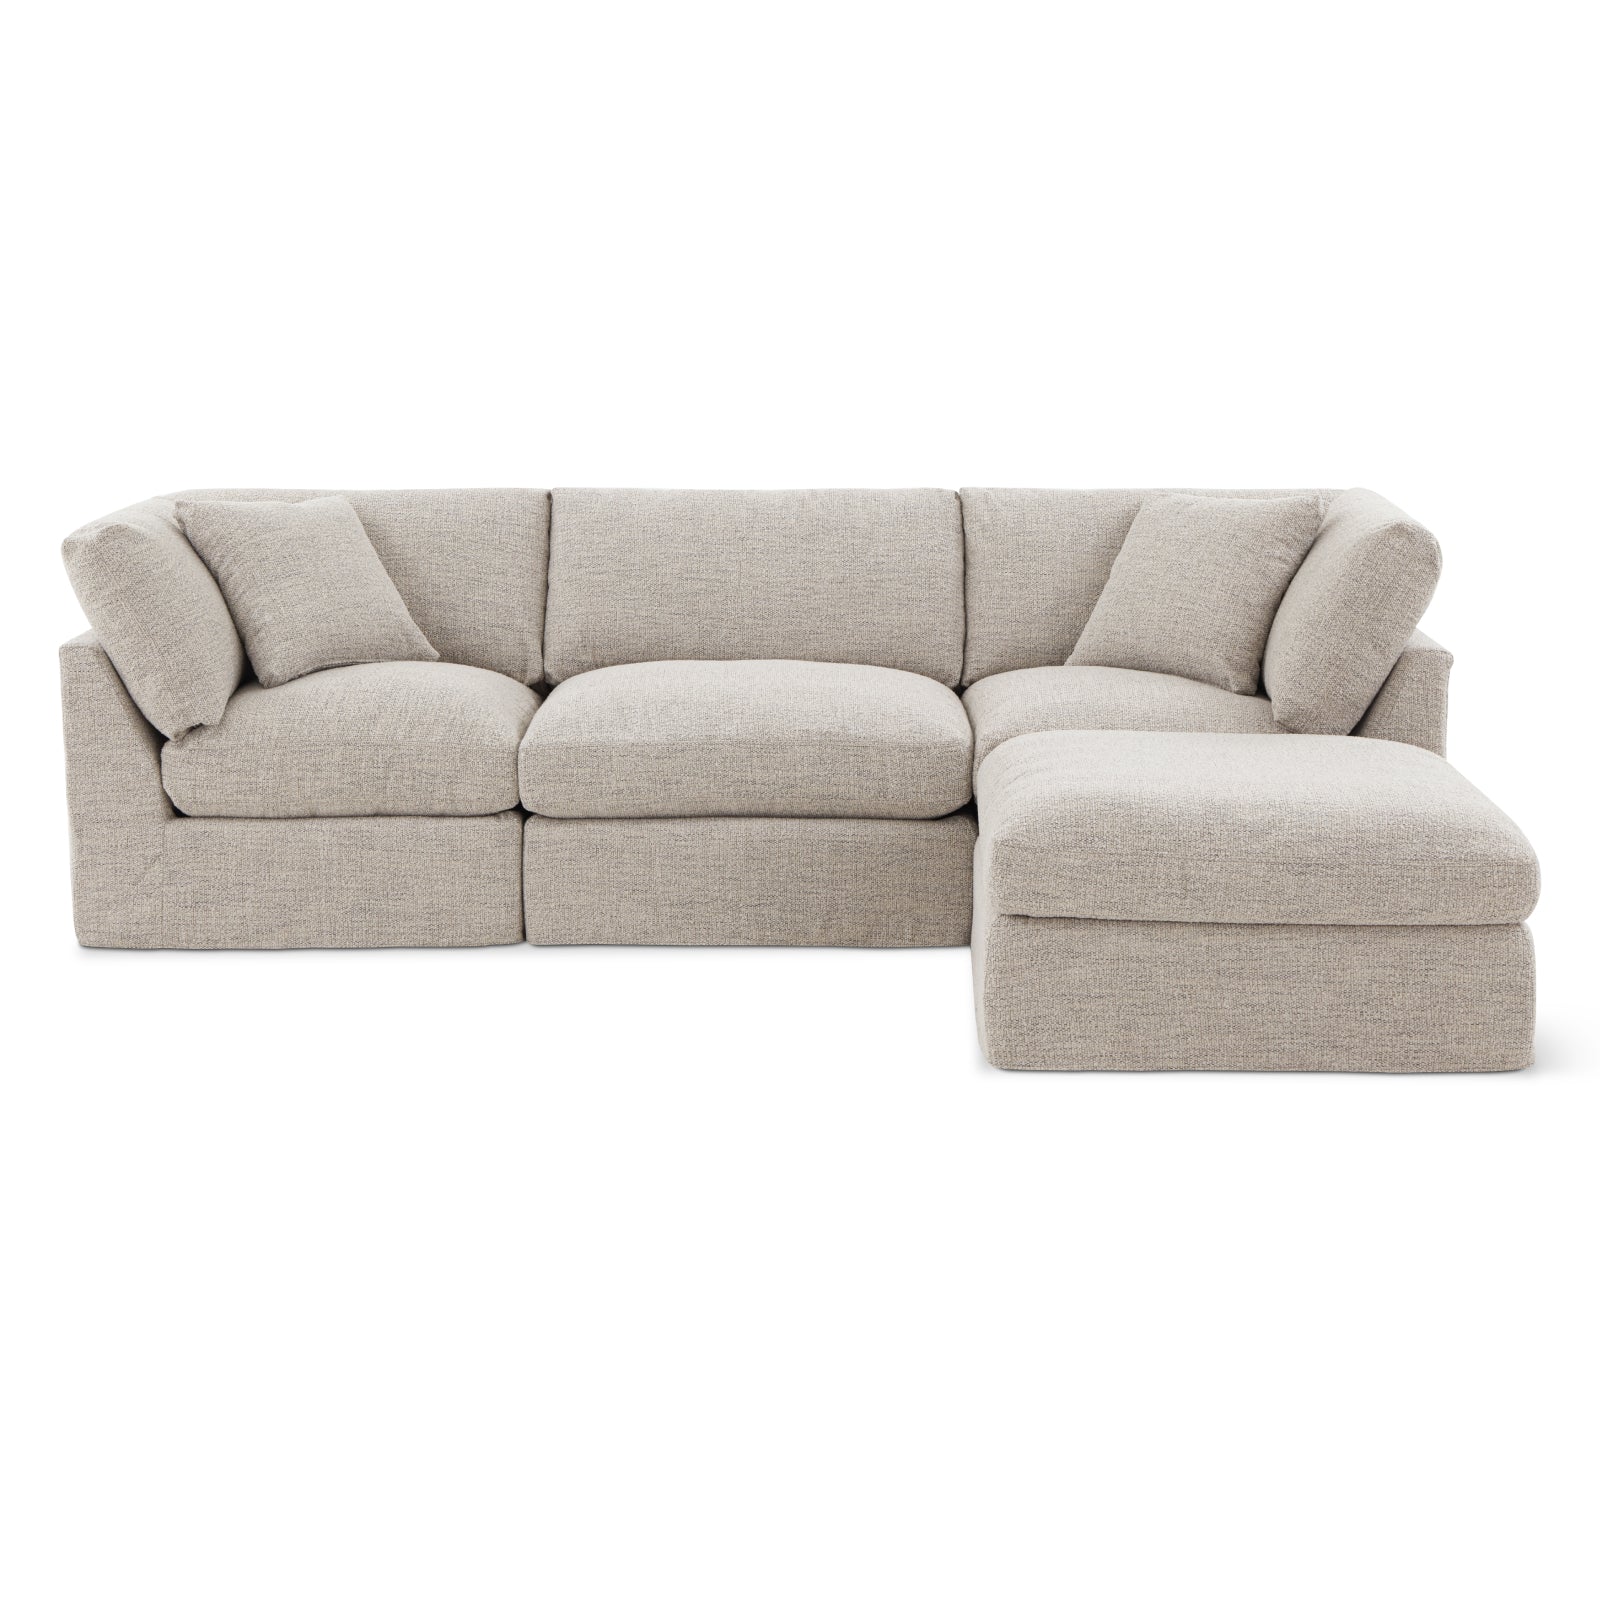 Get Together™ 4-Piece Modular Sectional, Standard, Oatmeal - Image 10